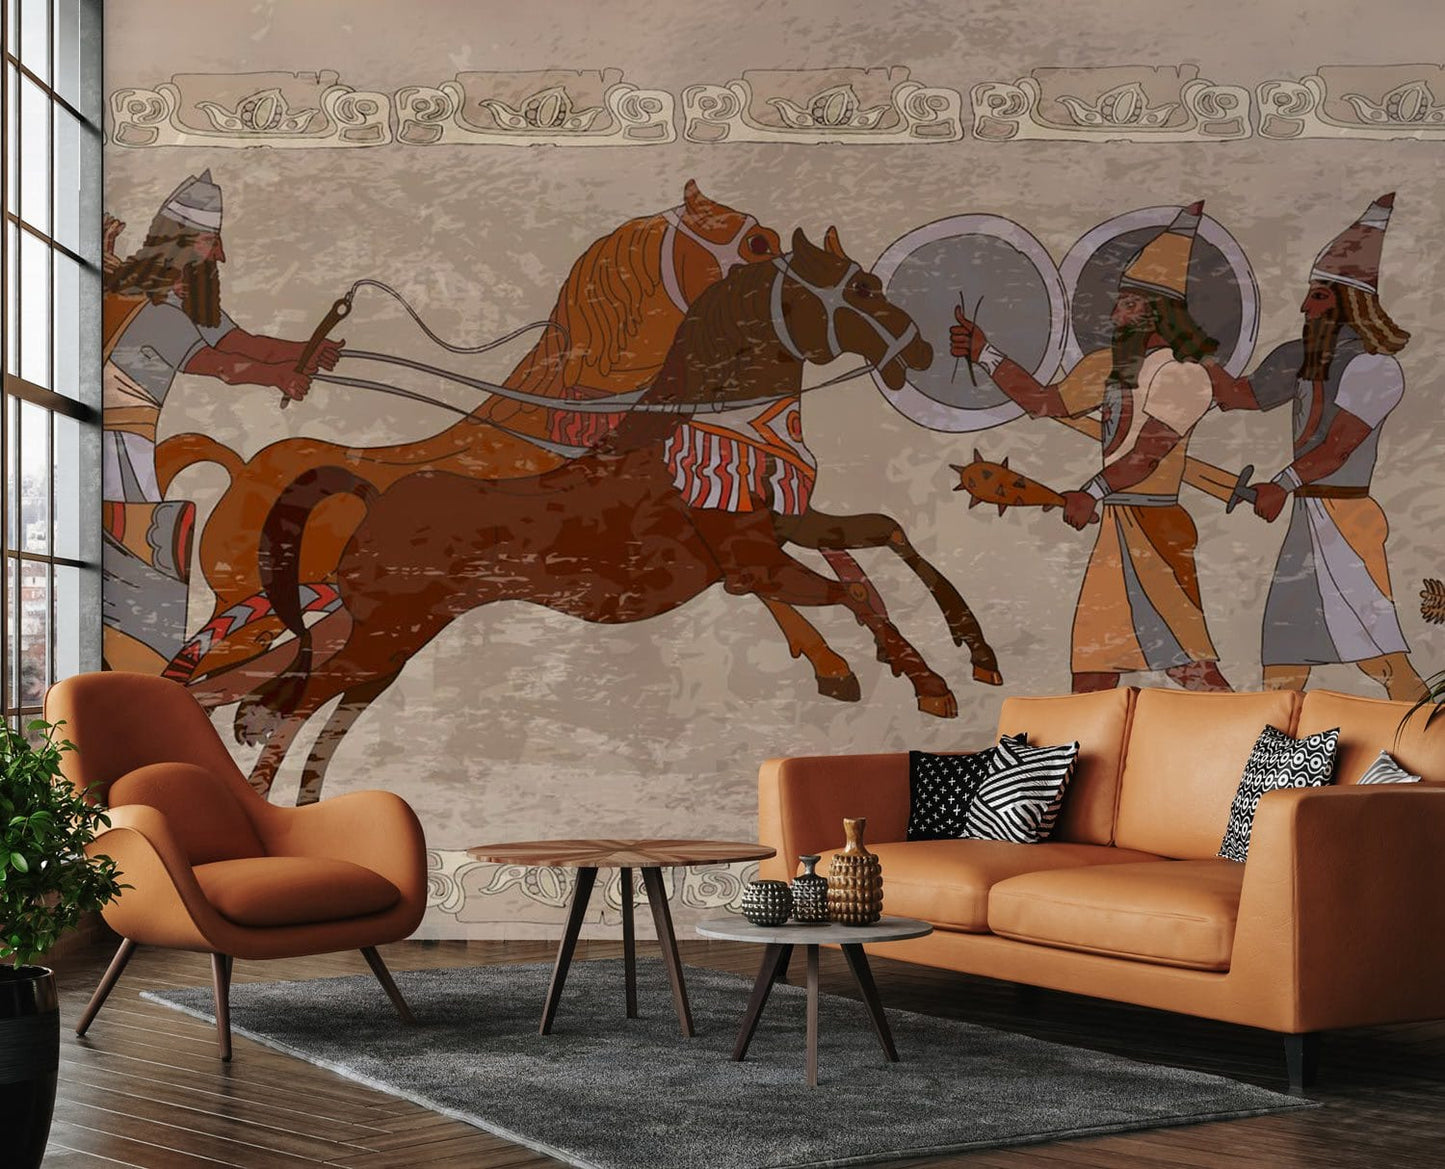 Wall��Mural of Training��Soldiers for Living Room